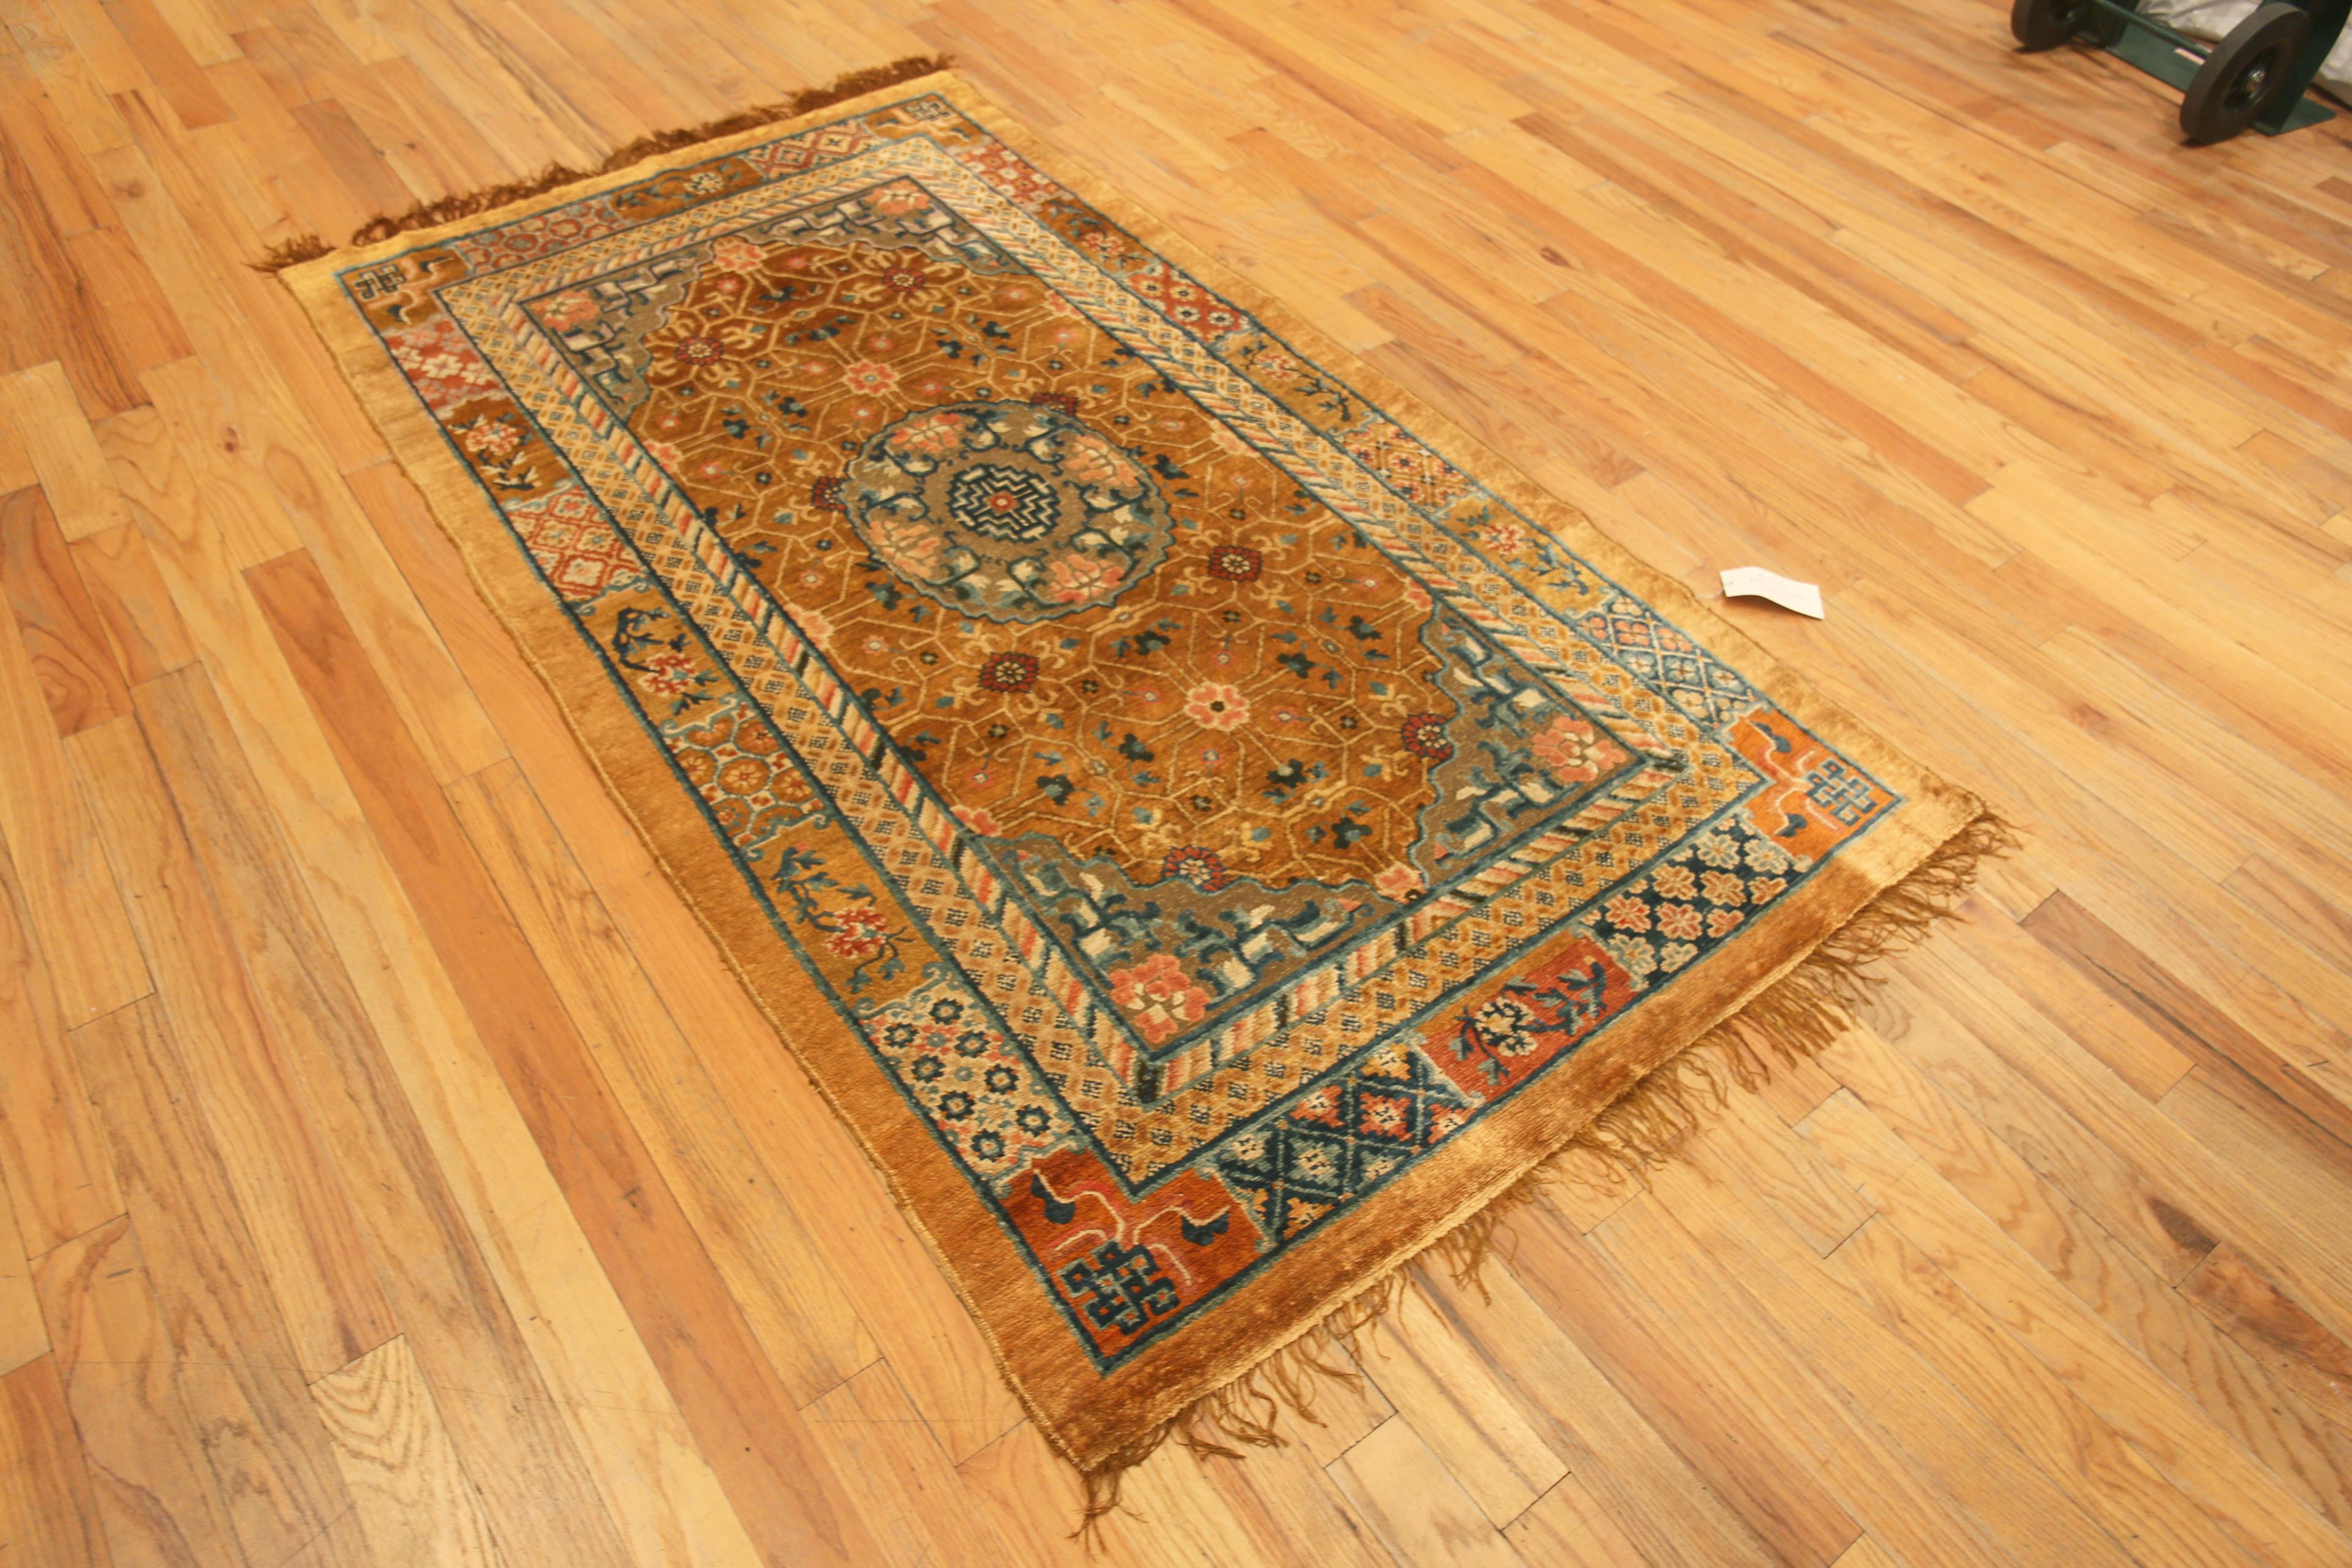 Collectible Antique Mid 19th Century Chinese Metallic and Silk Pile Rug 4' x 7' In Good Condition For Sale In New York, NY